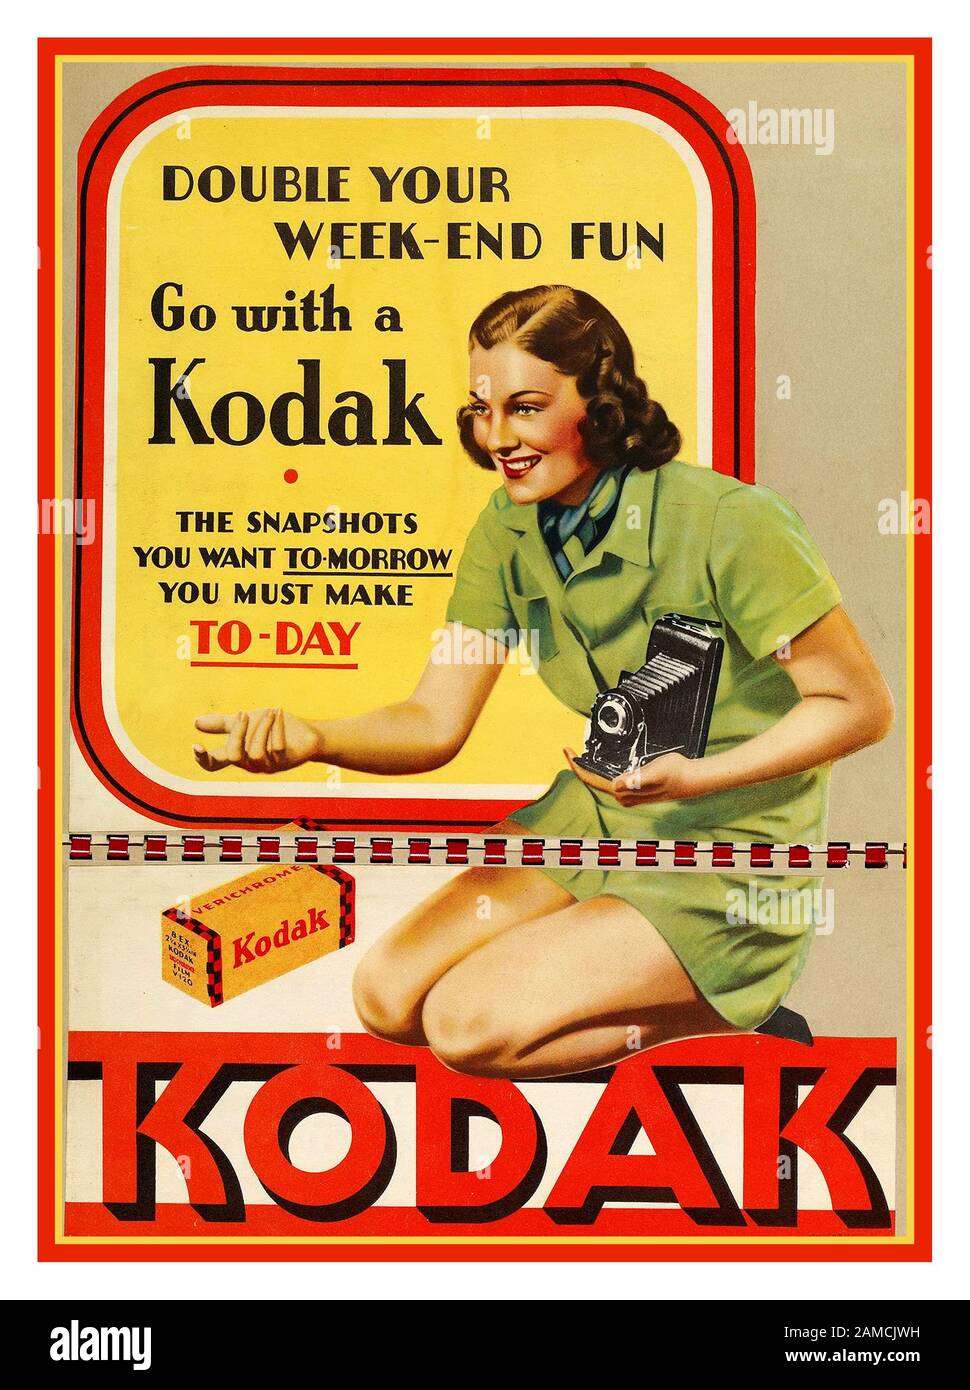 Vintage 1930's Kodak Photo Dealer Advertisement ’Double Your Week-End Fun, Go with a Kodak', 1930s Kodak Roll Film Camera and Verichrome film. ‘The snapshots you want tomorrow you must make today.’ Poster point of sale Stock Photo